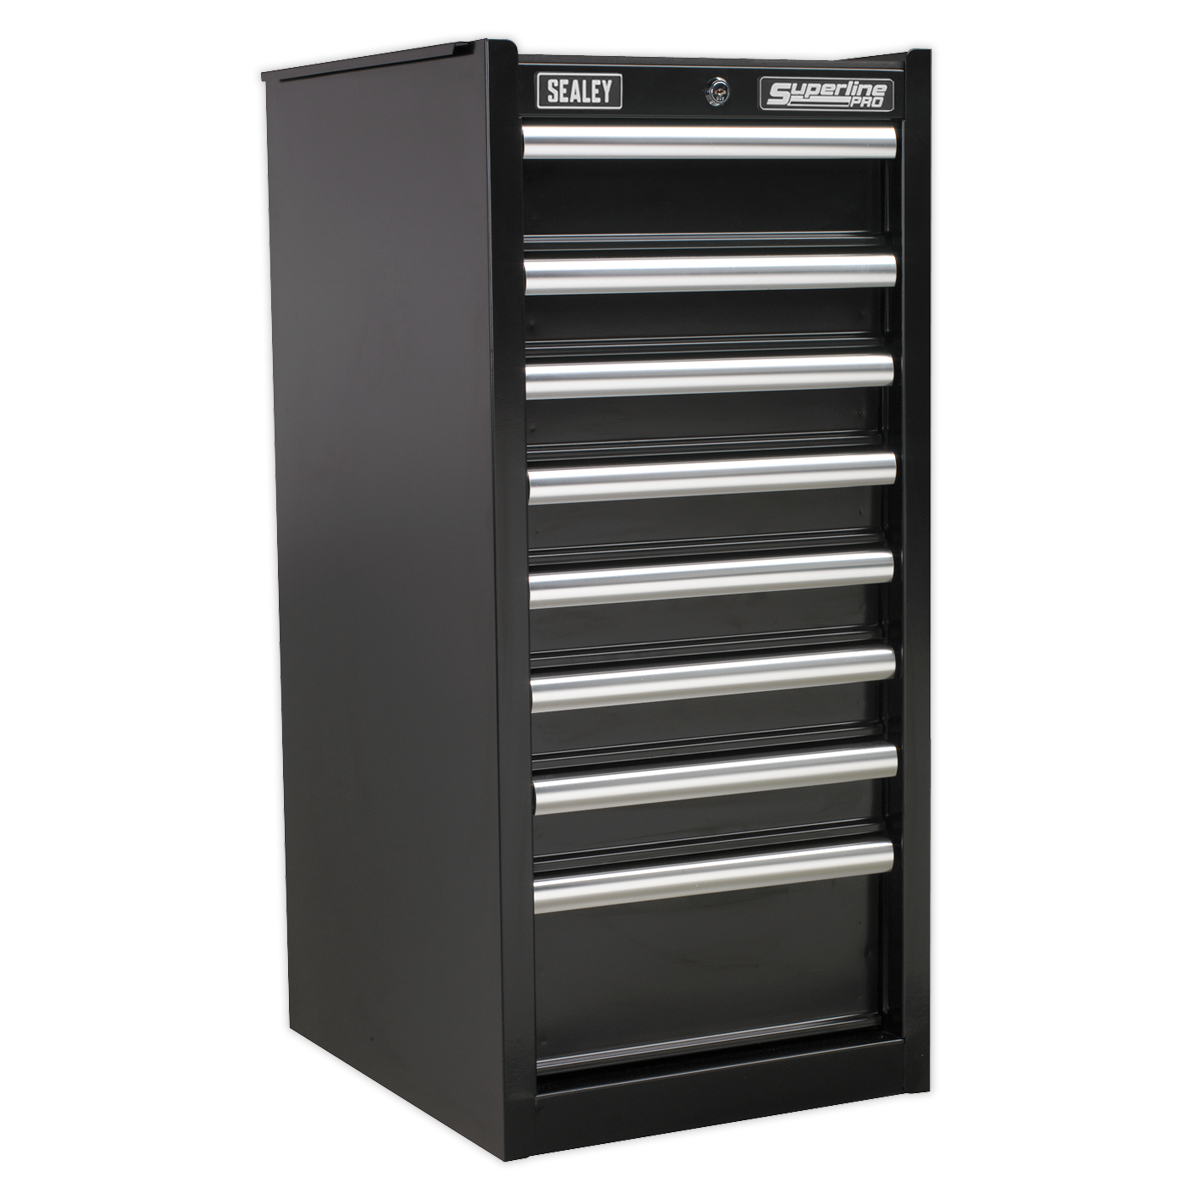 Sealey Hang-On Chest 8 Drawer with Ball-Bearing Slides - Black